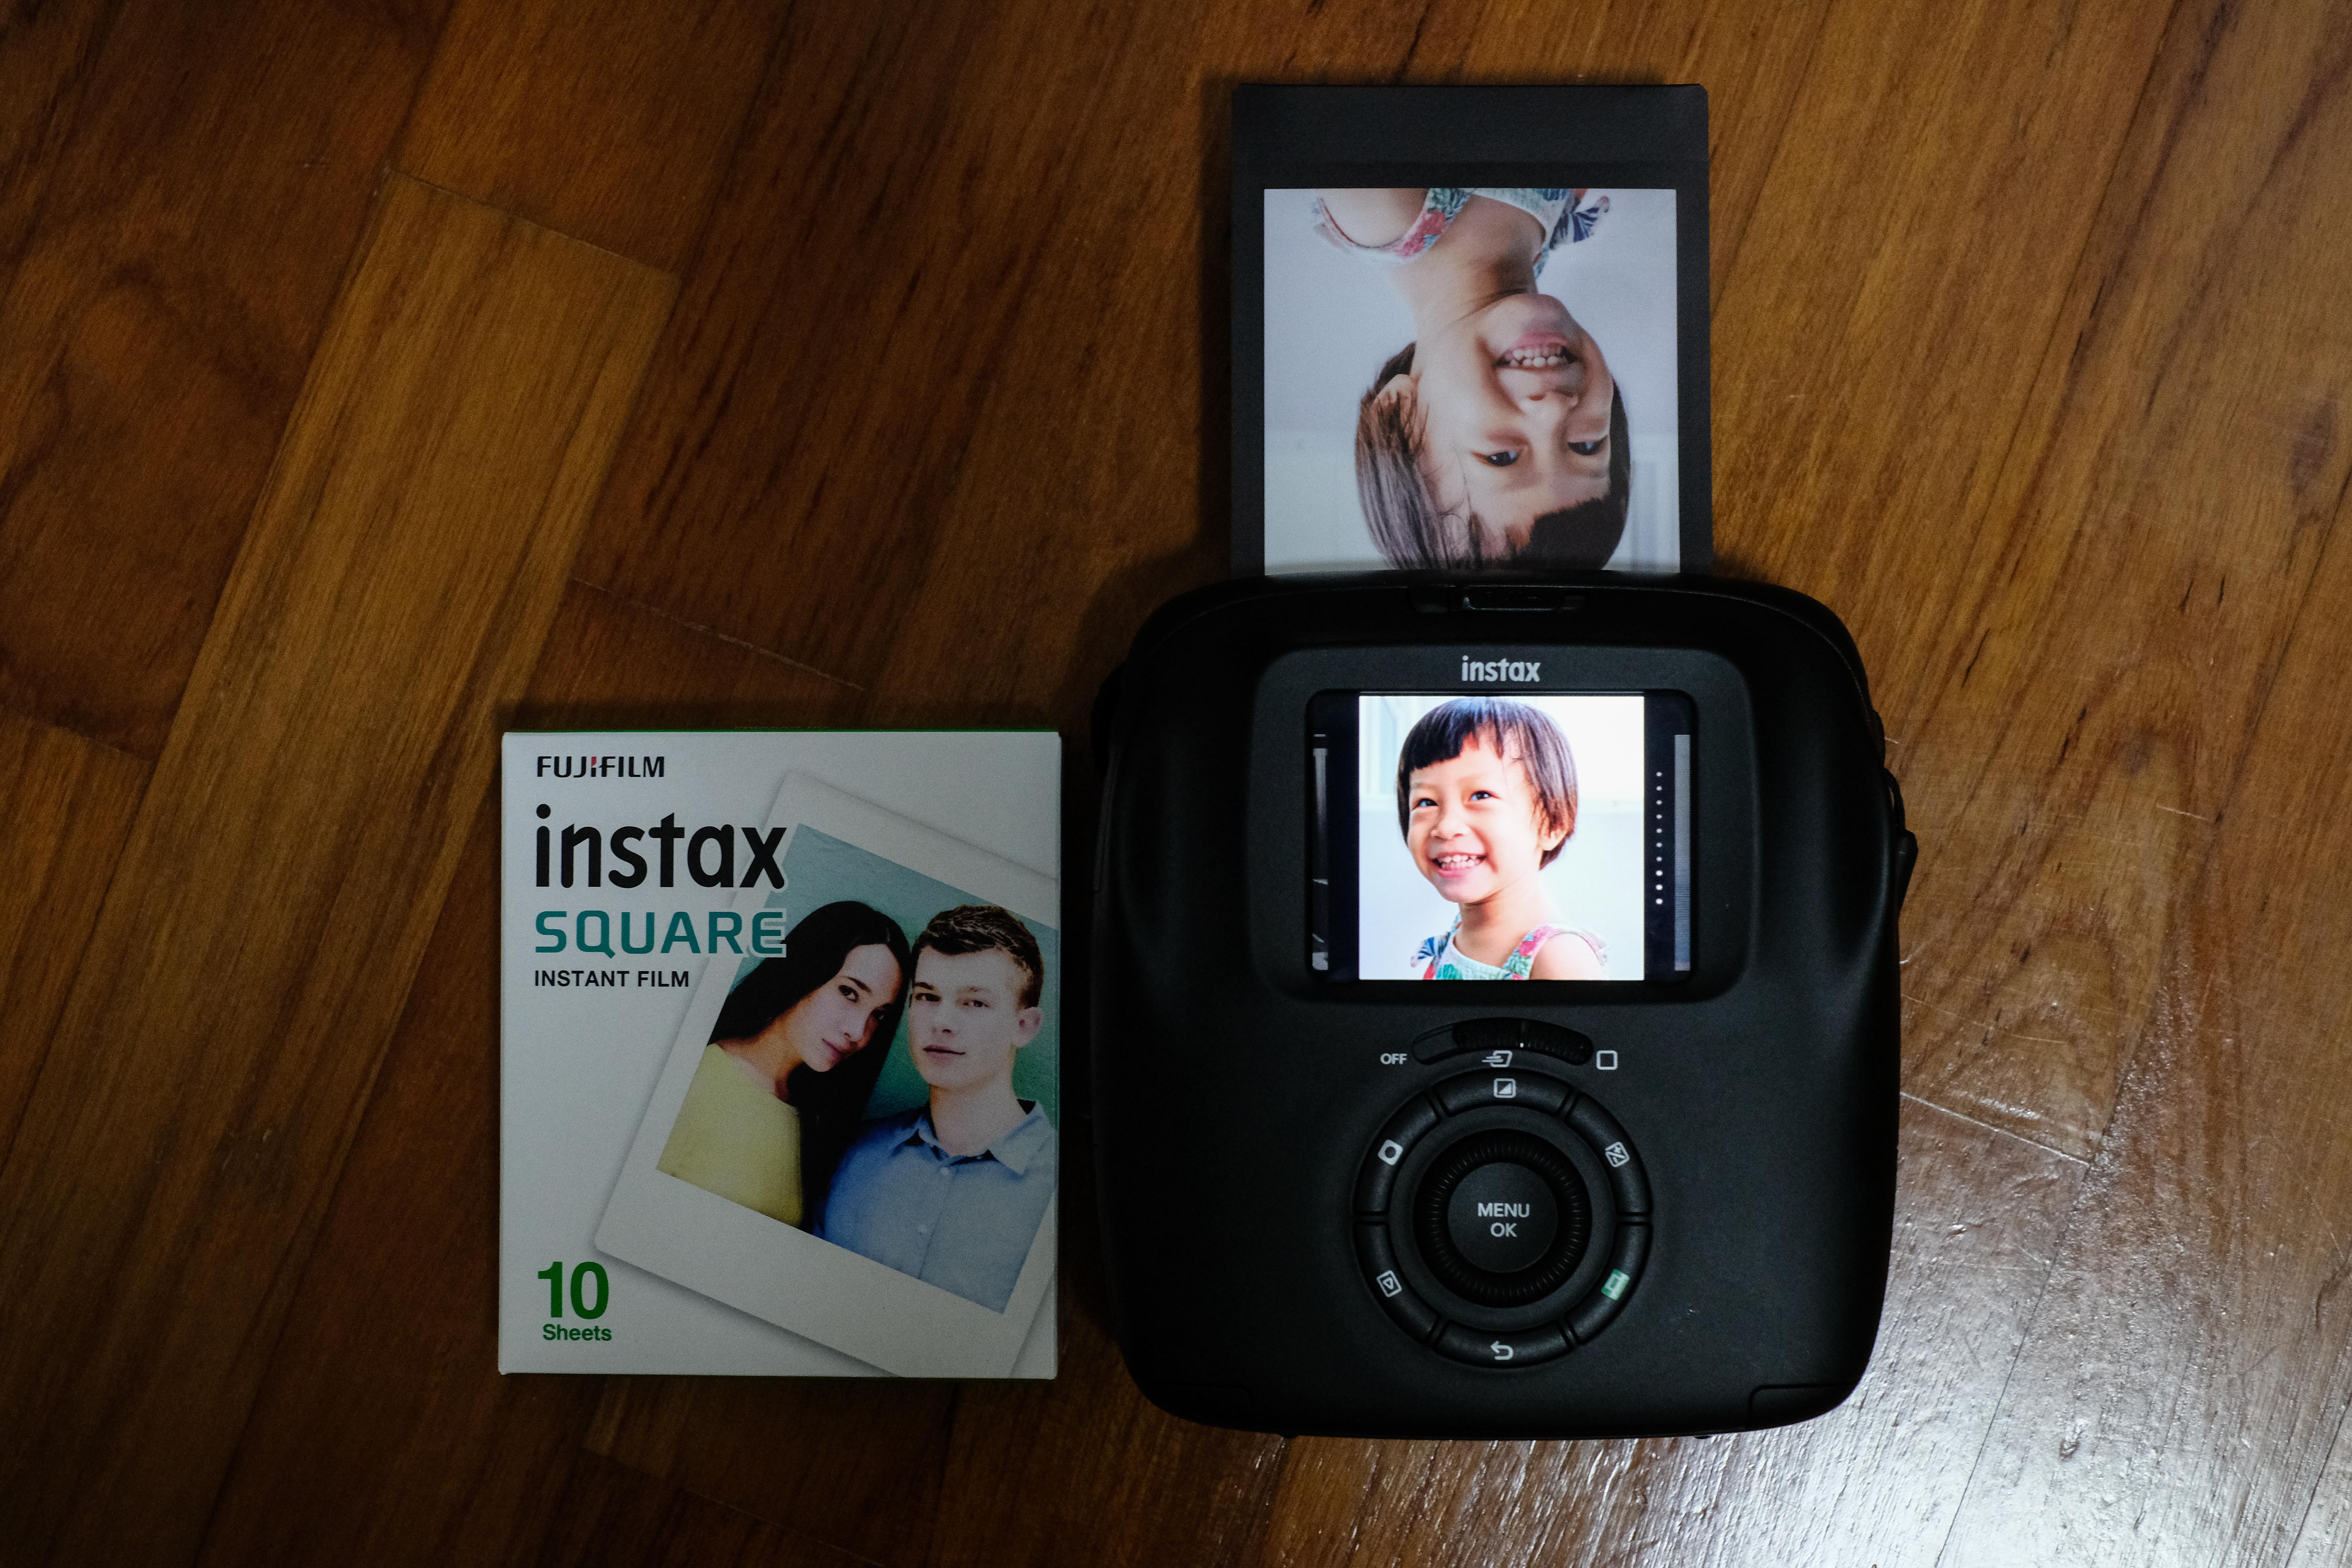 most informative review of the Fujifilm Instax SQ20: now comes in a three-in-one package. – KeithWee | Photography